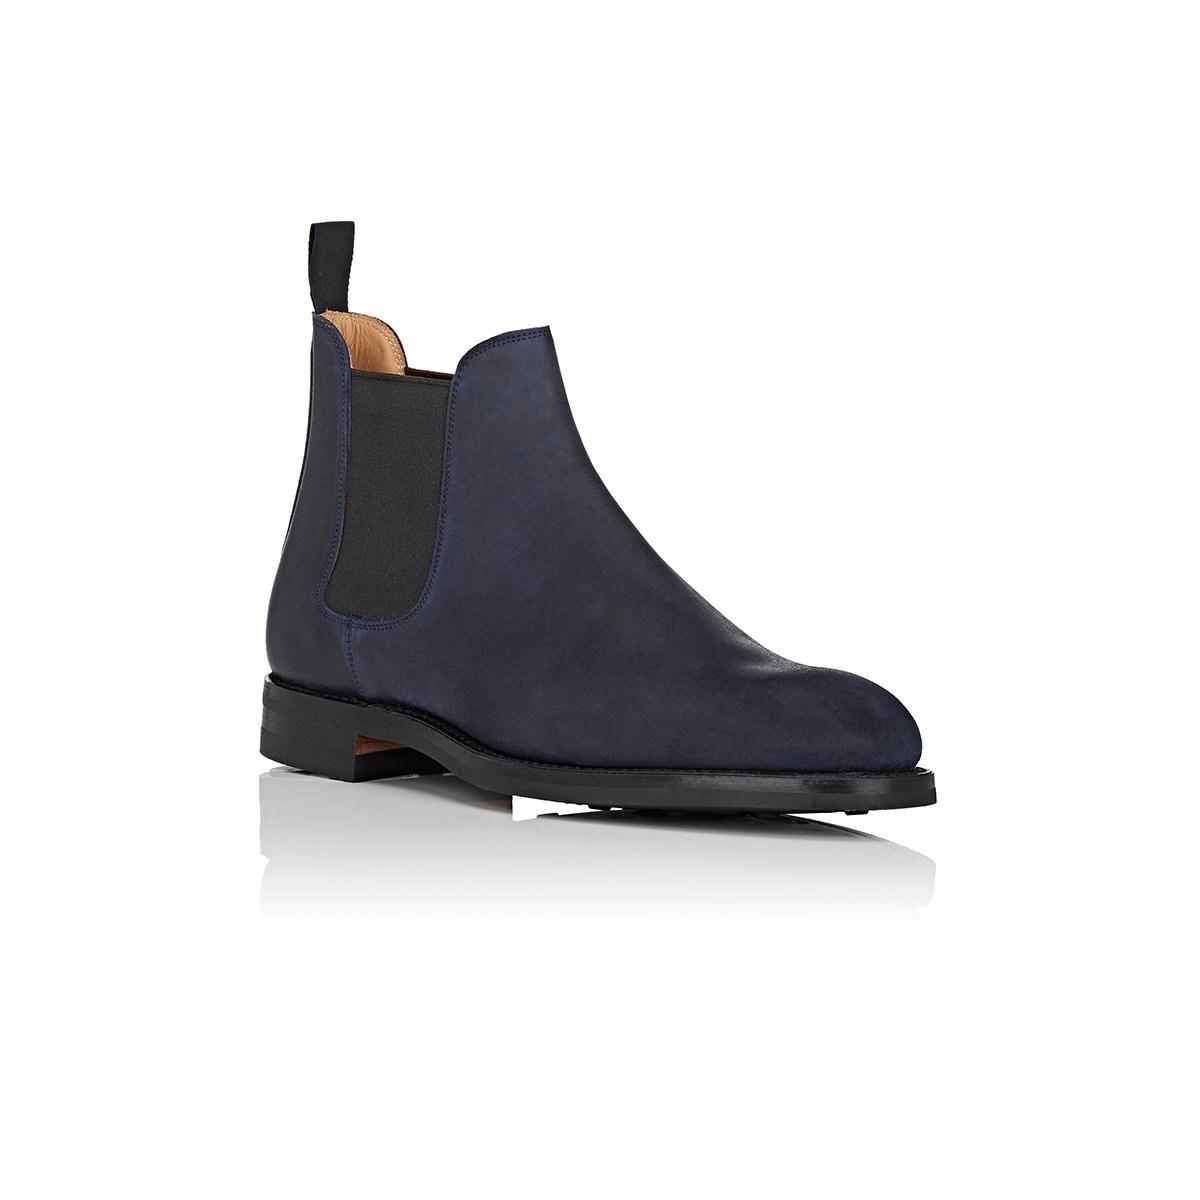 Crockett and Jones chelsea 5 Leather Boots in Navy (Blue) for Men - Lyst